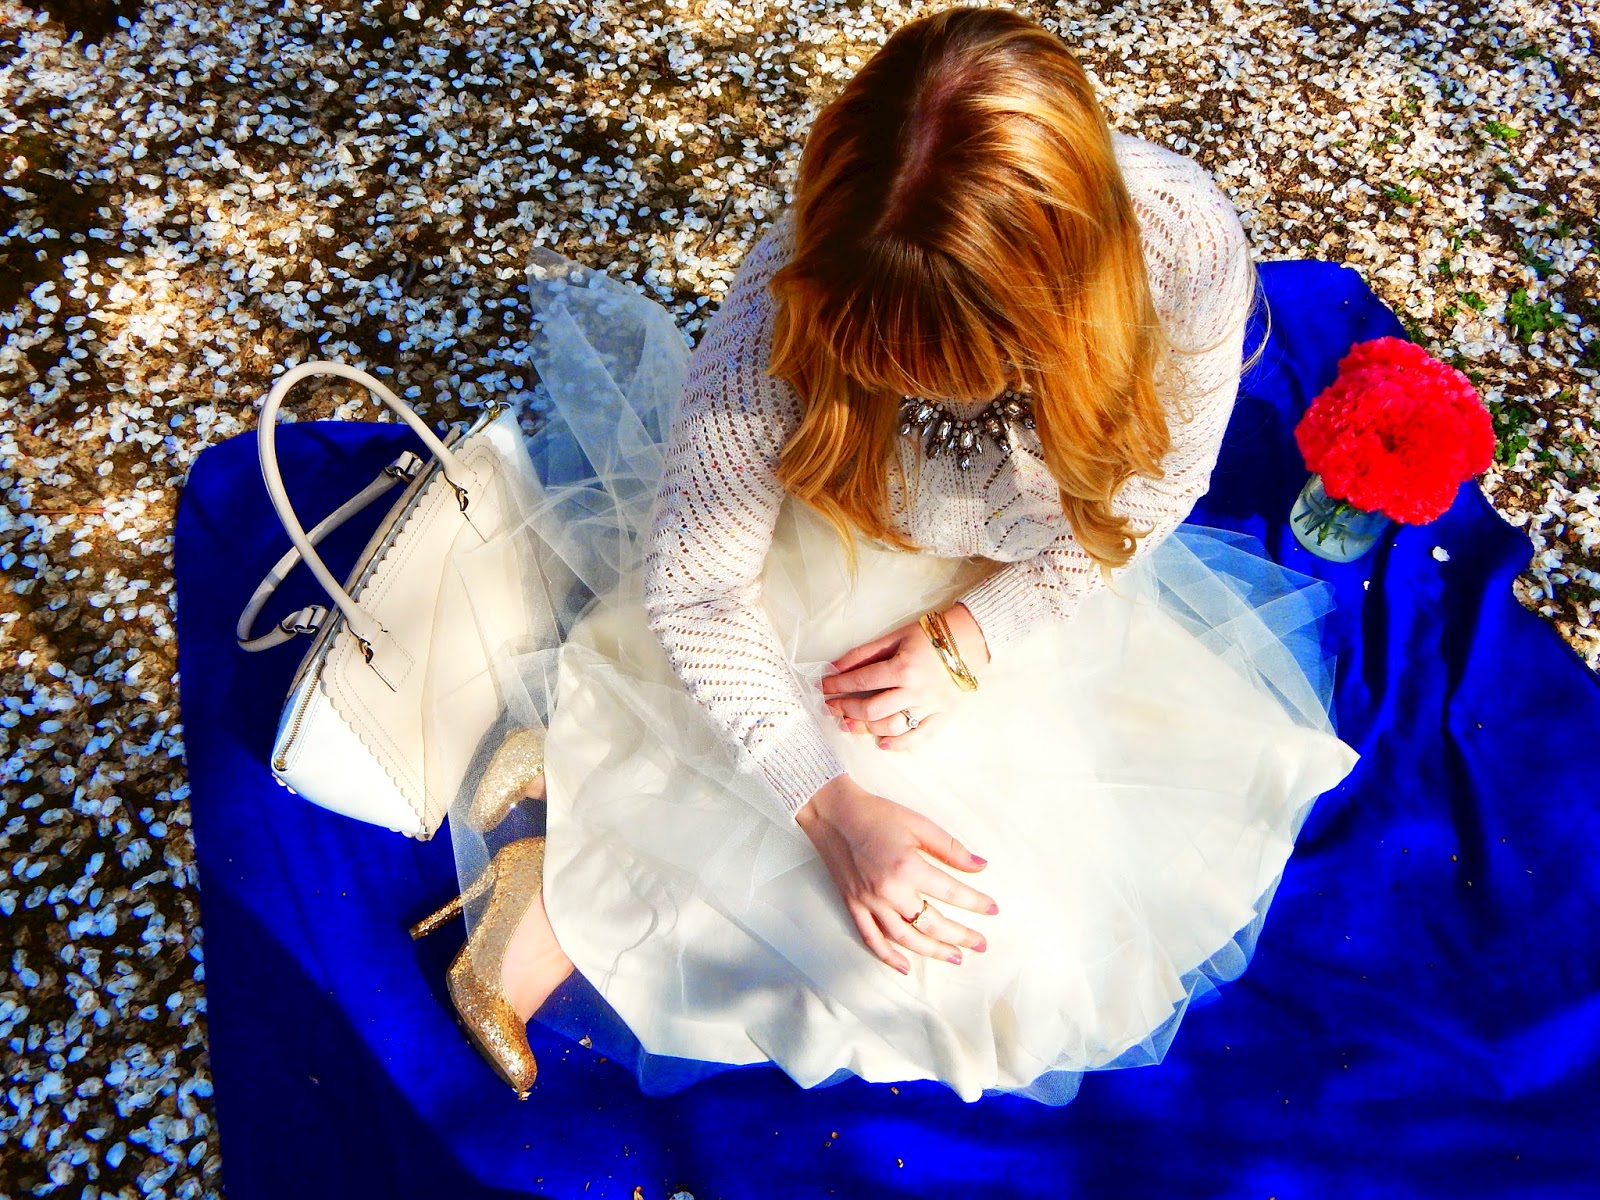 White Tulle Skirt Fairytale Outfit